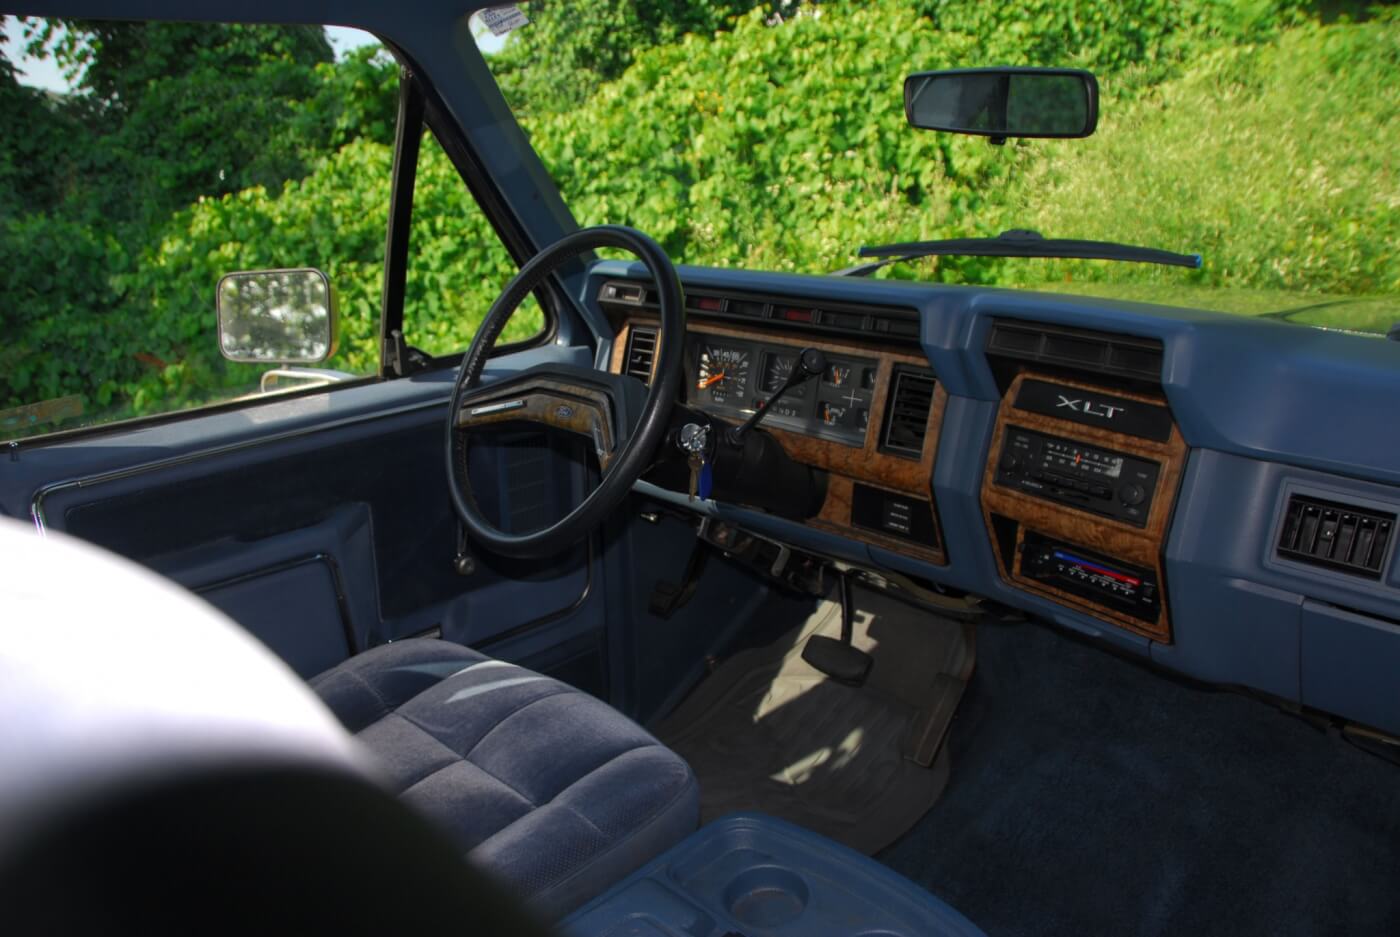 The 1983-1986 Bullnose era interiors ranged from a rubber mats, vinyl seat, bare-bones hose-out interiors to this plush velour cabin with carlike options.